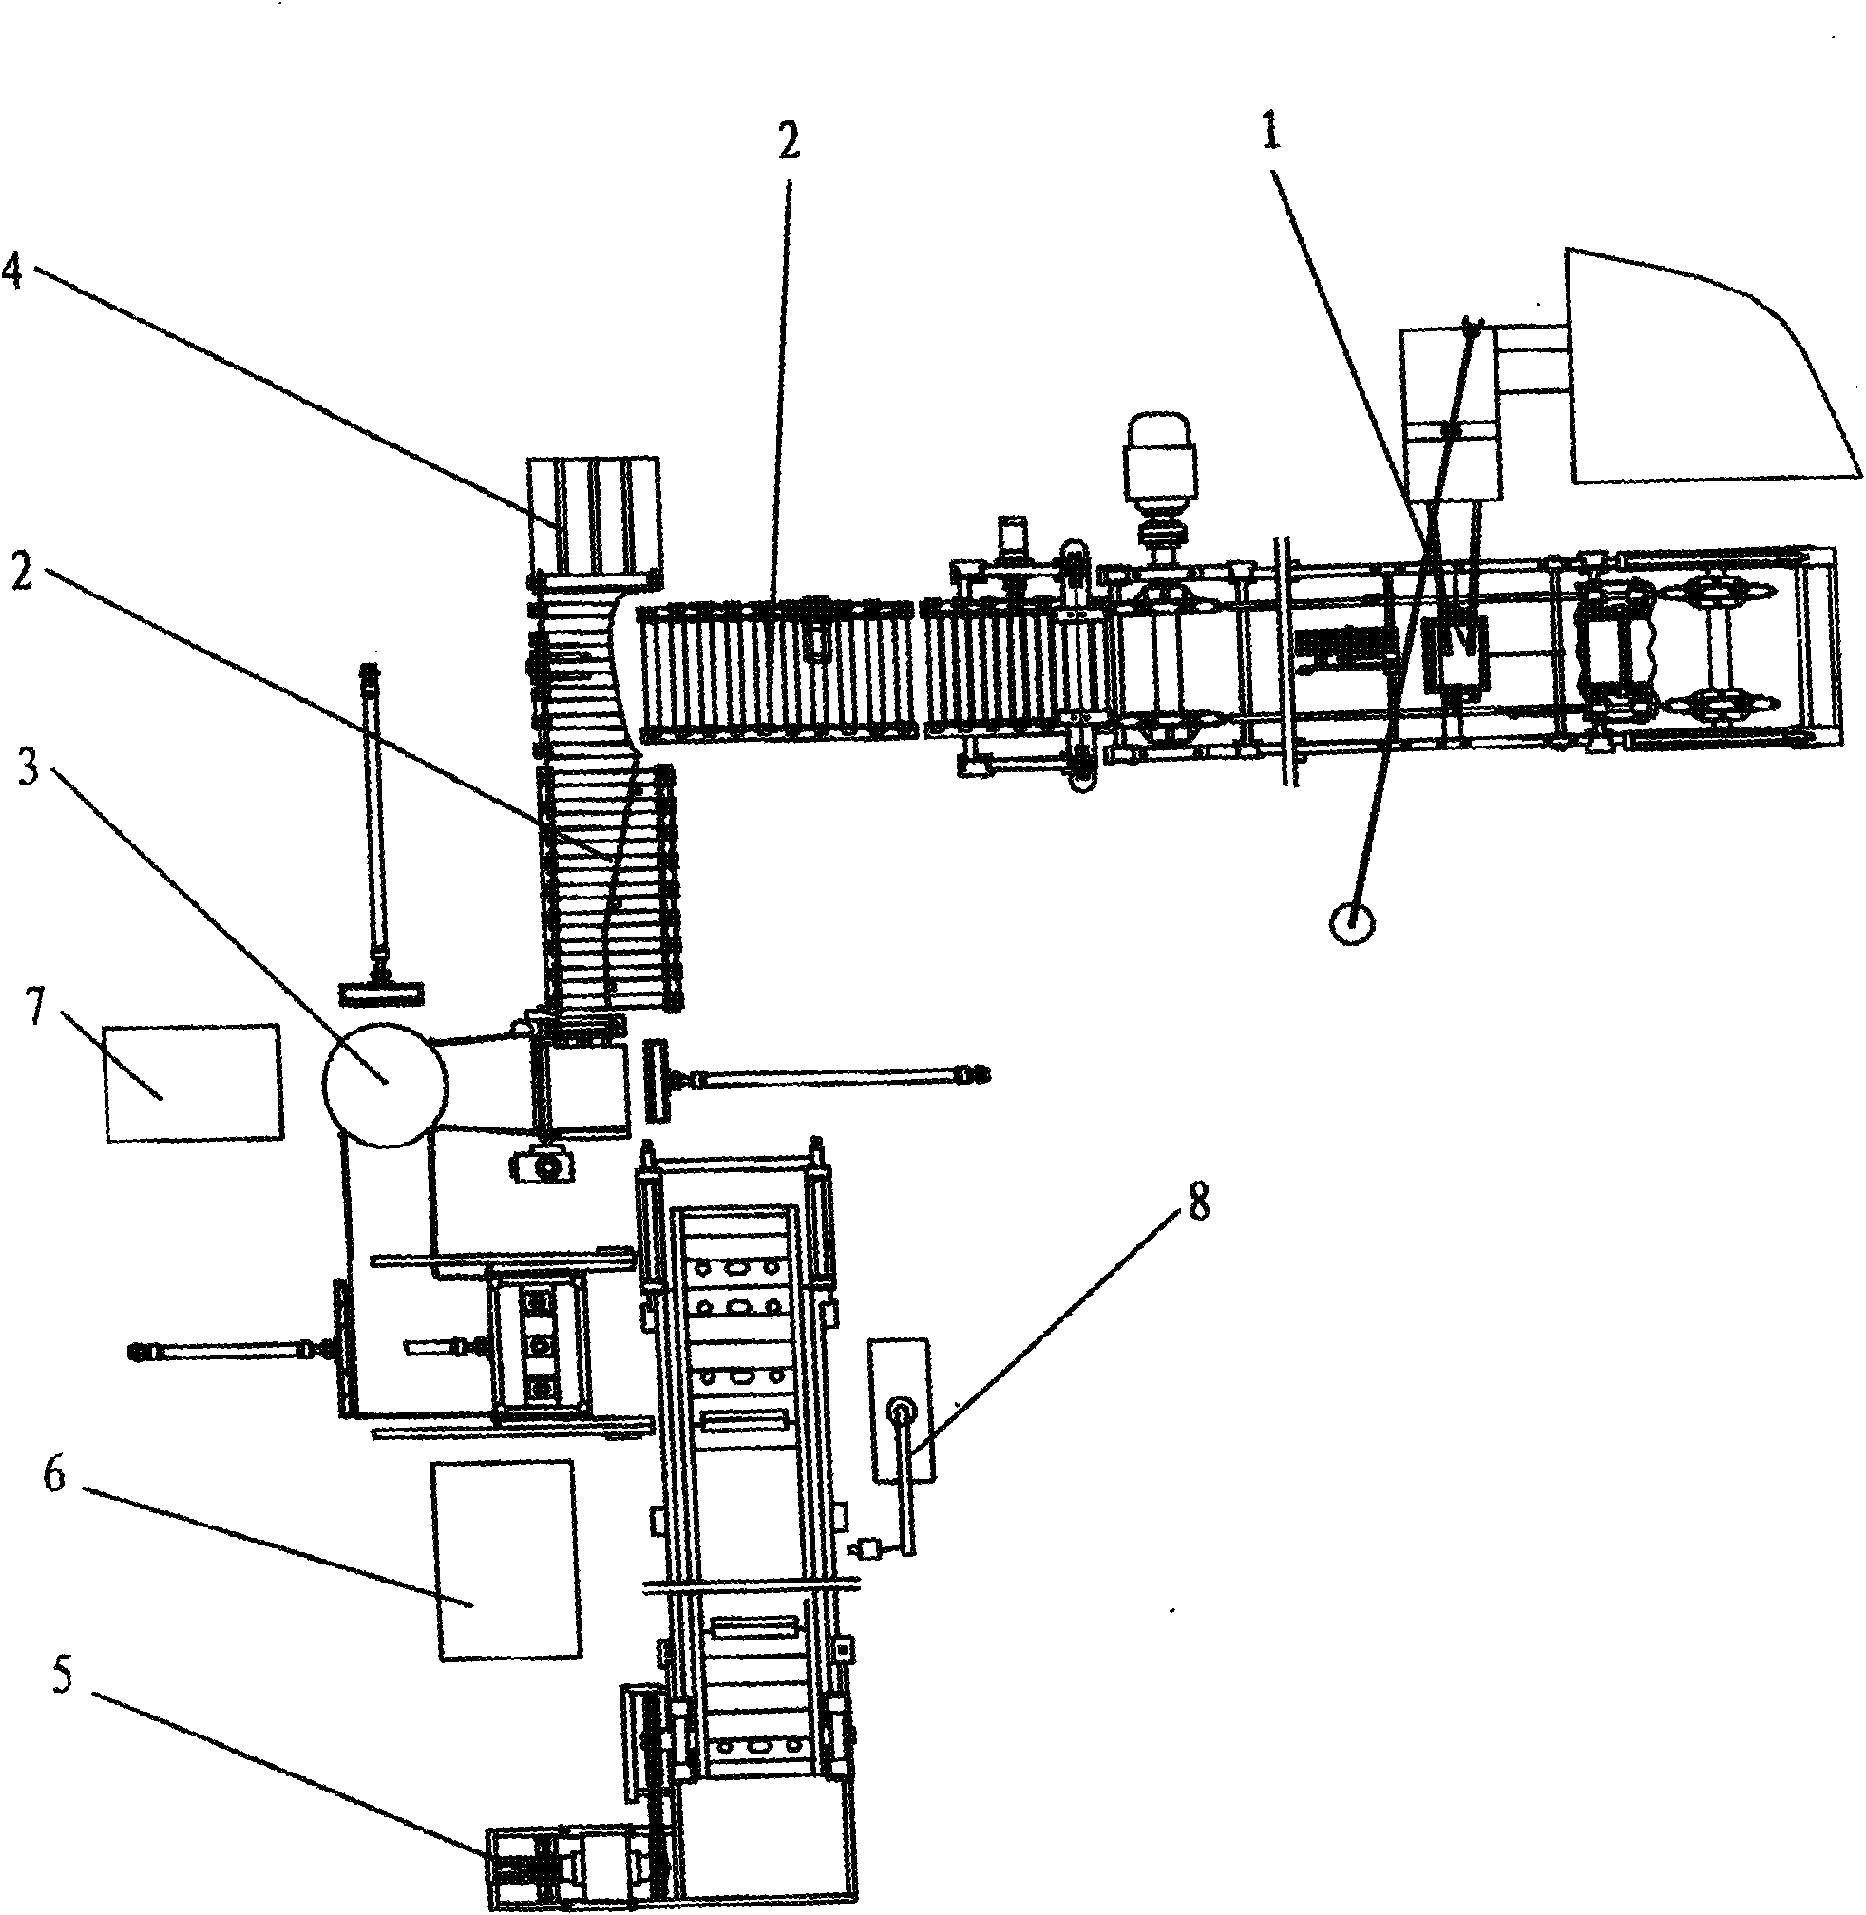 System for automatically producing metal ingot stack